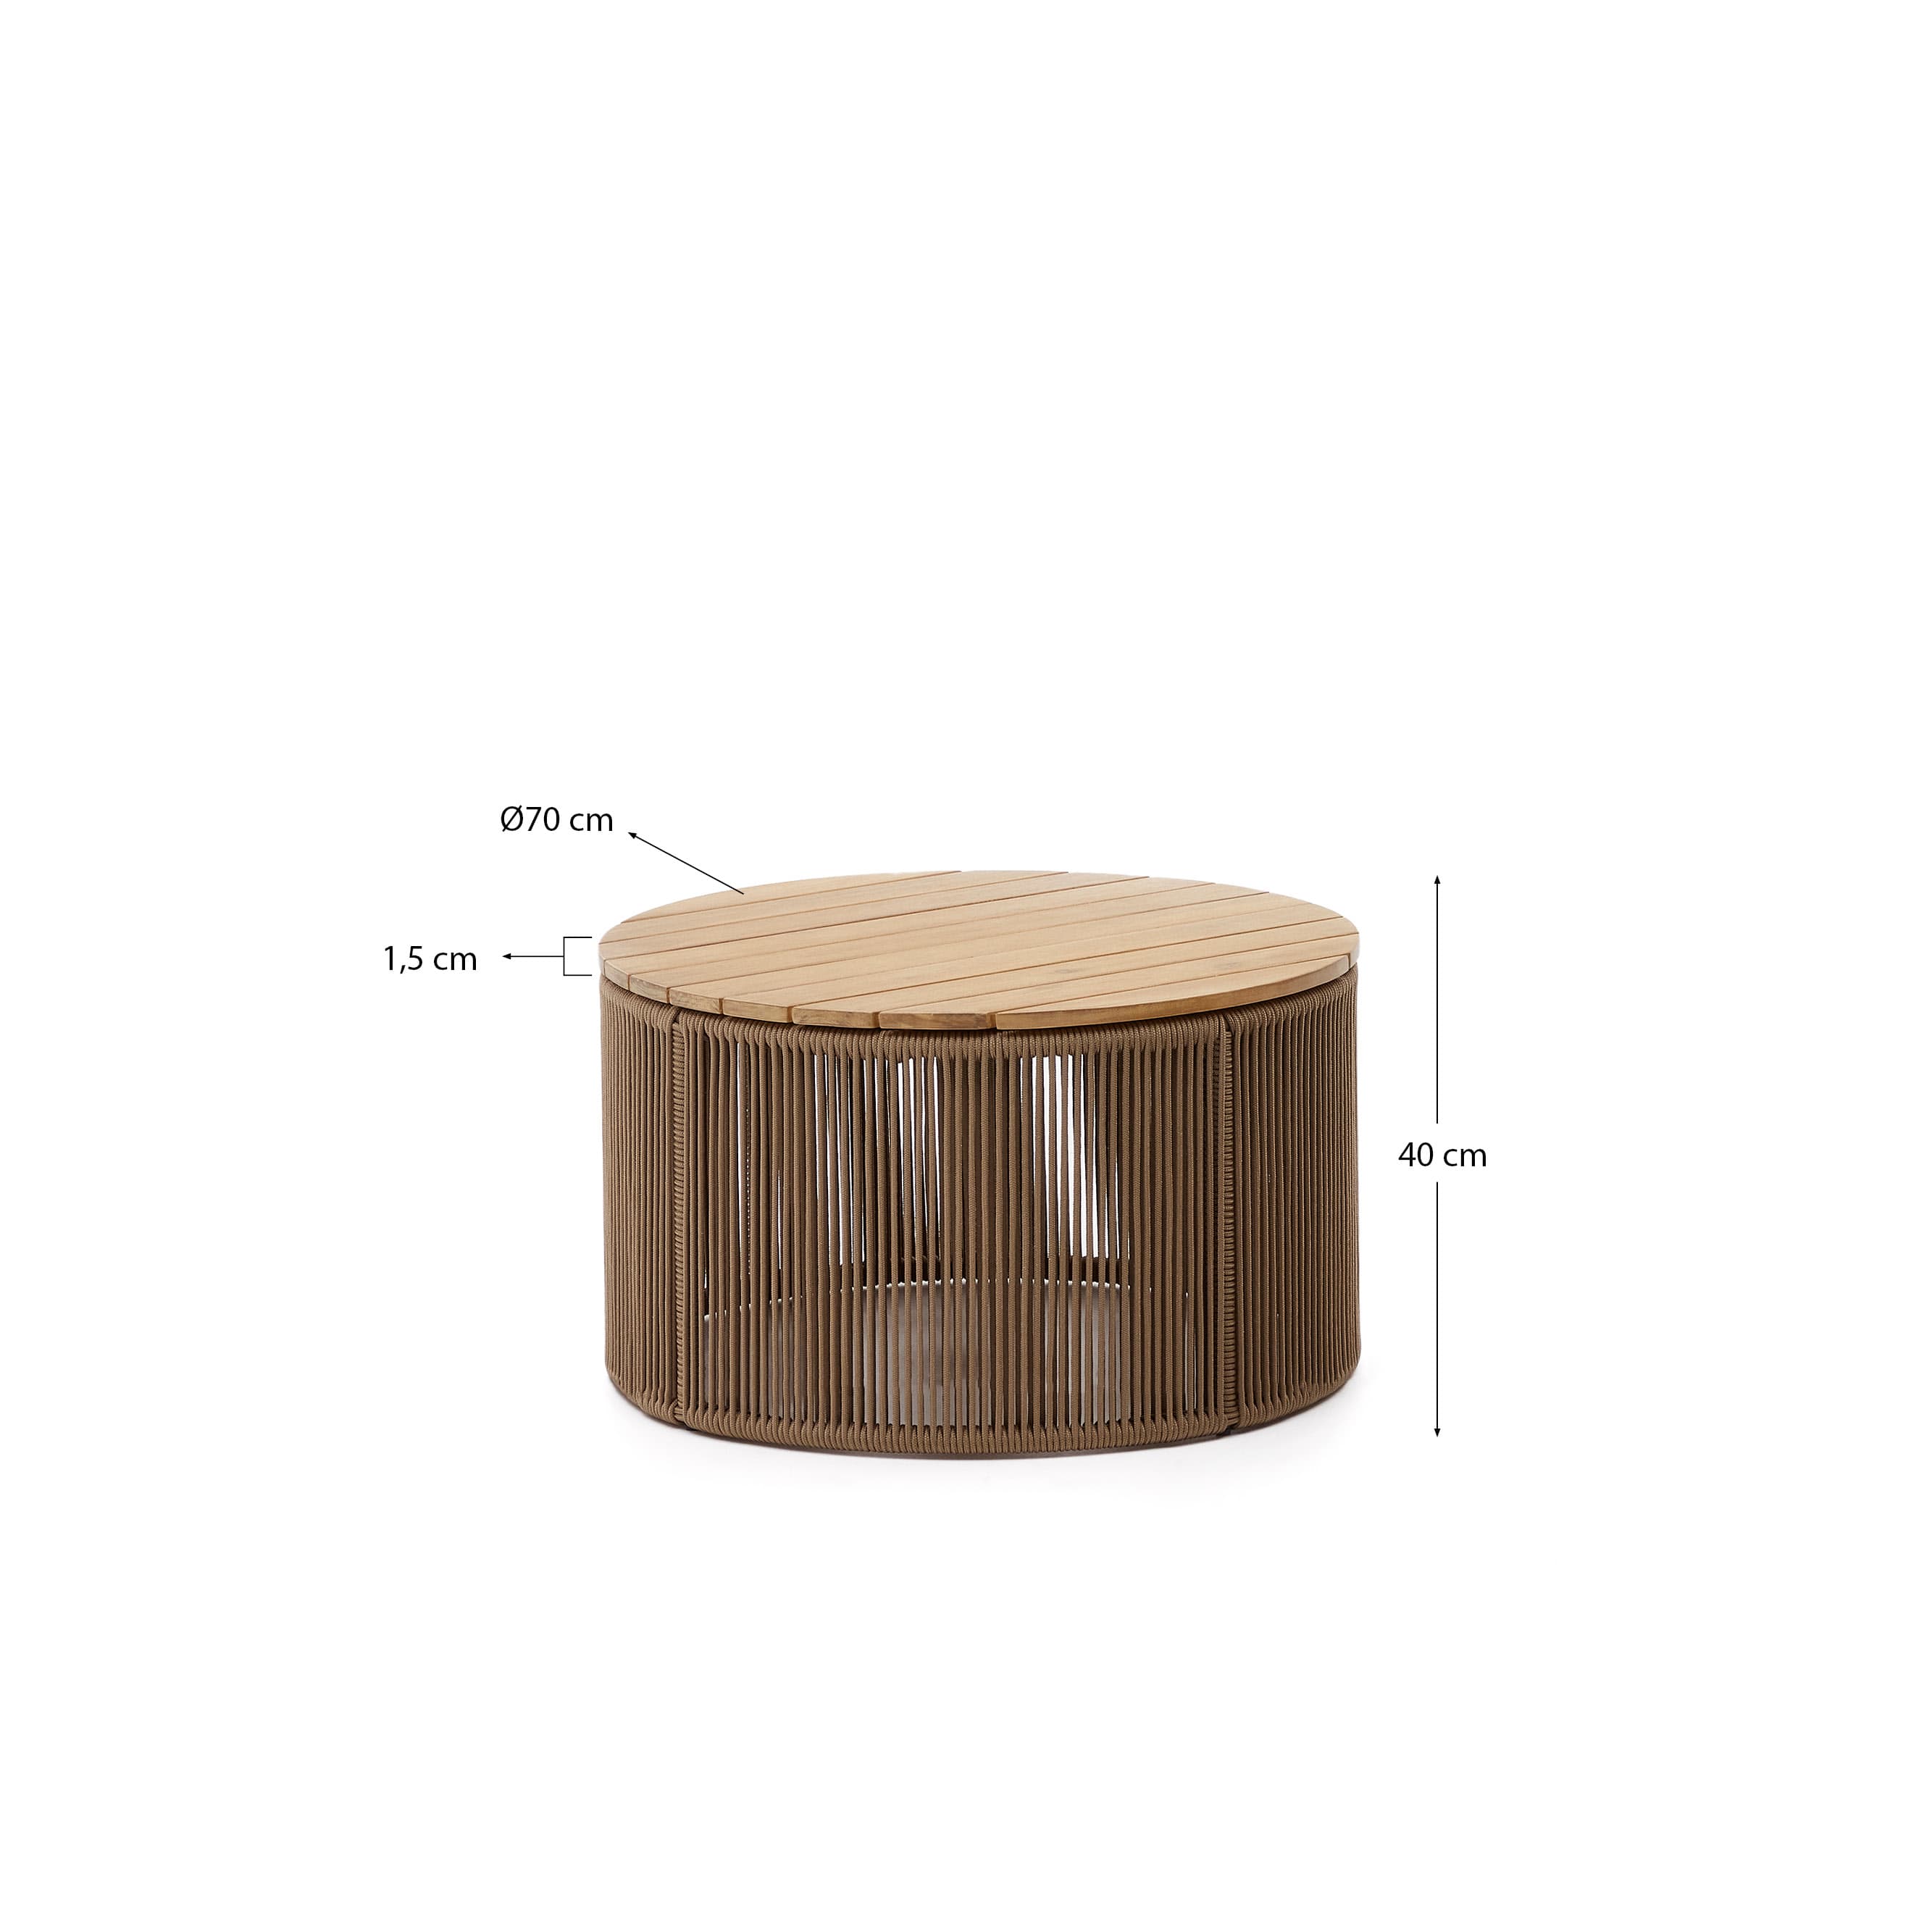 Dandara coffee table made of steel, beige cord and 100% FSC solid acacia wood, Ø70 cm - sizes